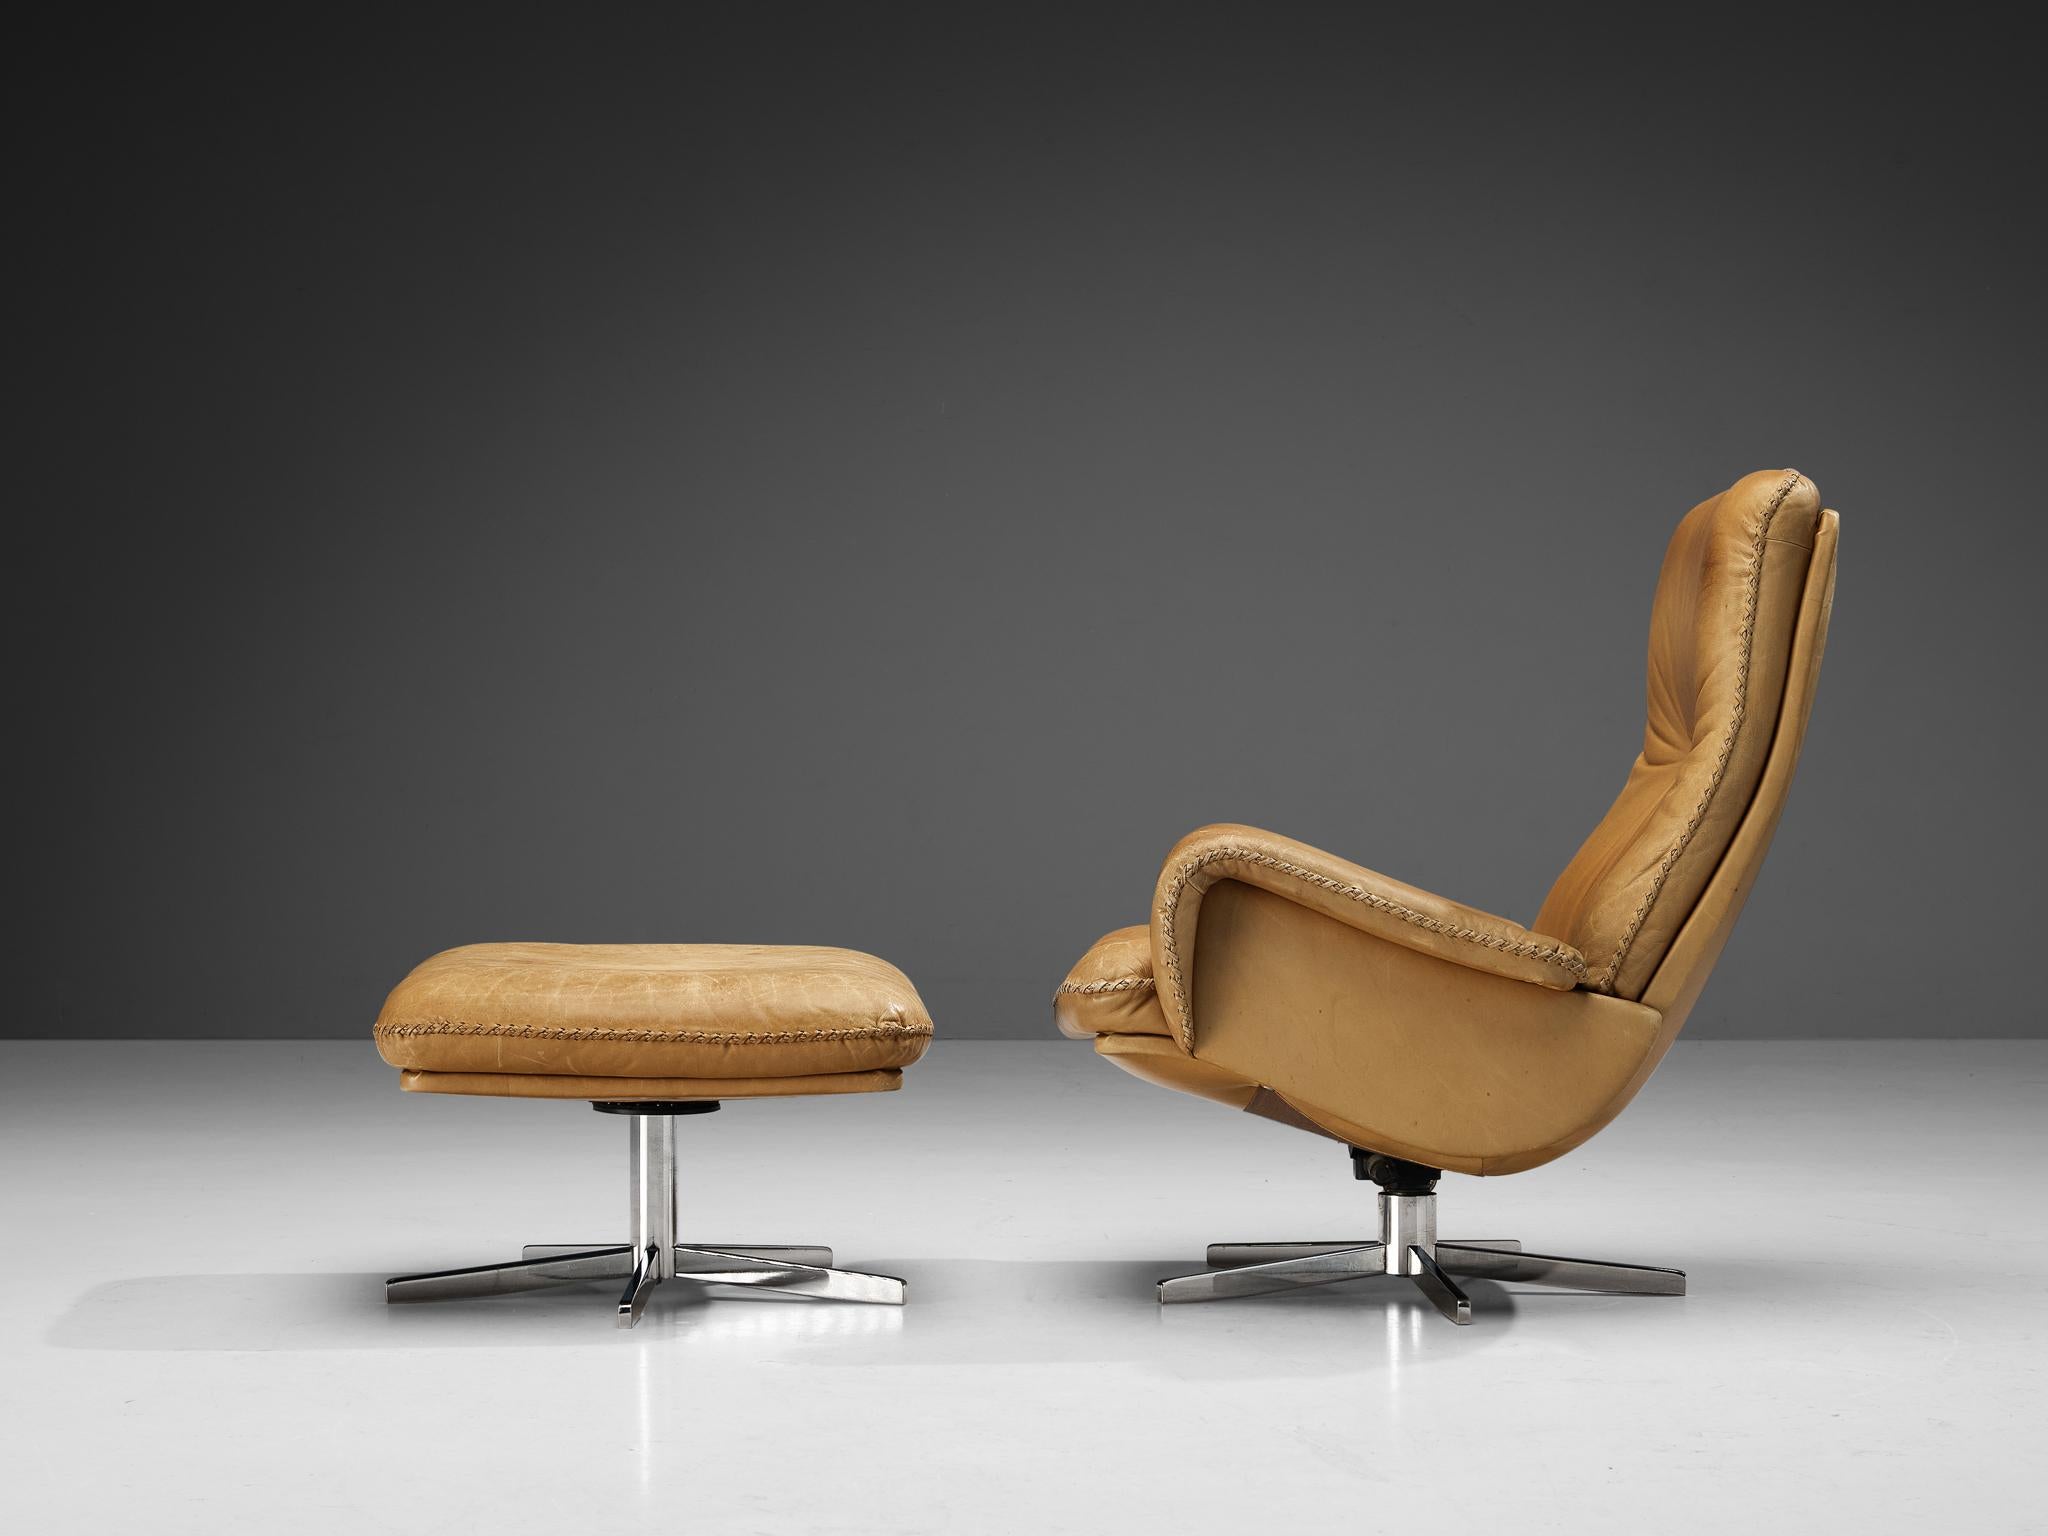 Swiss De Sede Set of 'S231' Lounge Chair and Ottoman in Camel Leather